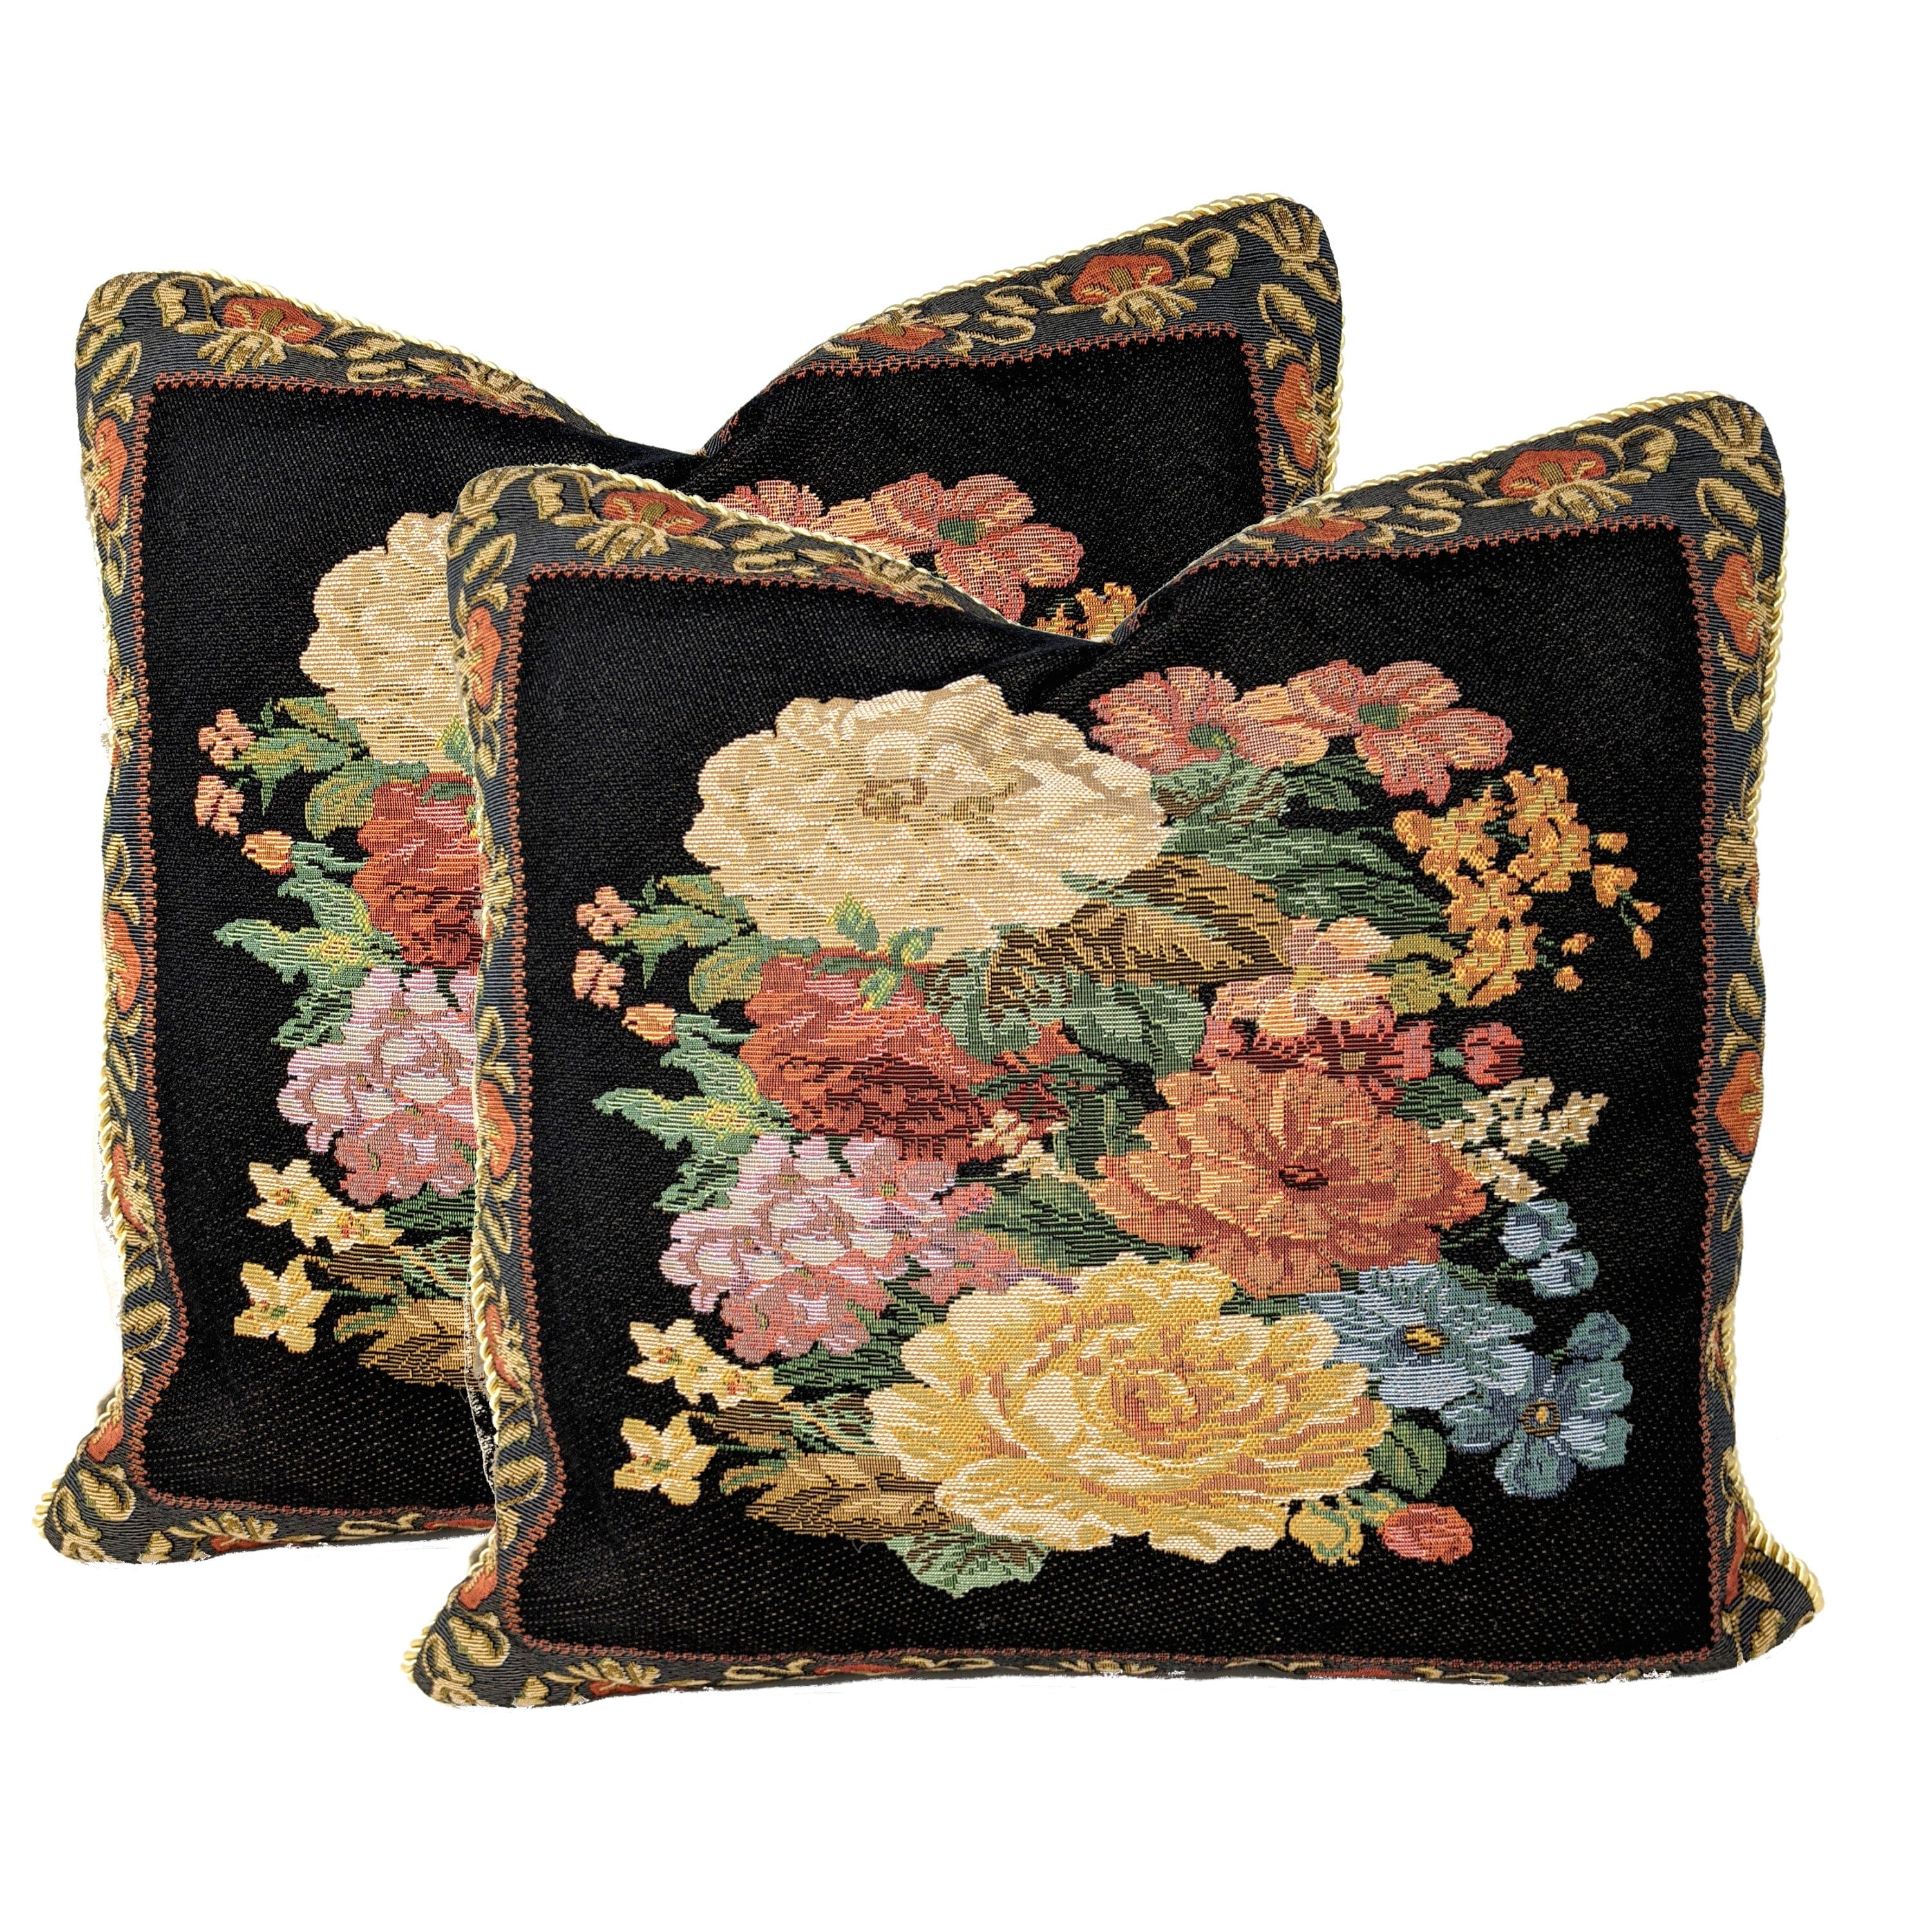 Tache Black Victorian Country Rustic Floral Midnight Awakening Tapestry Throw Pillow Cover (3089BL) - Tache Home Fashion